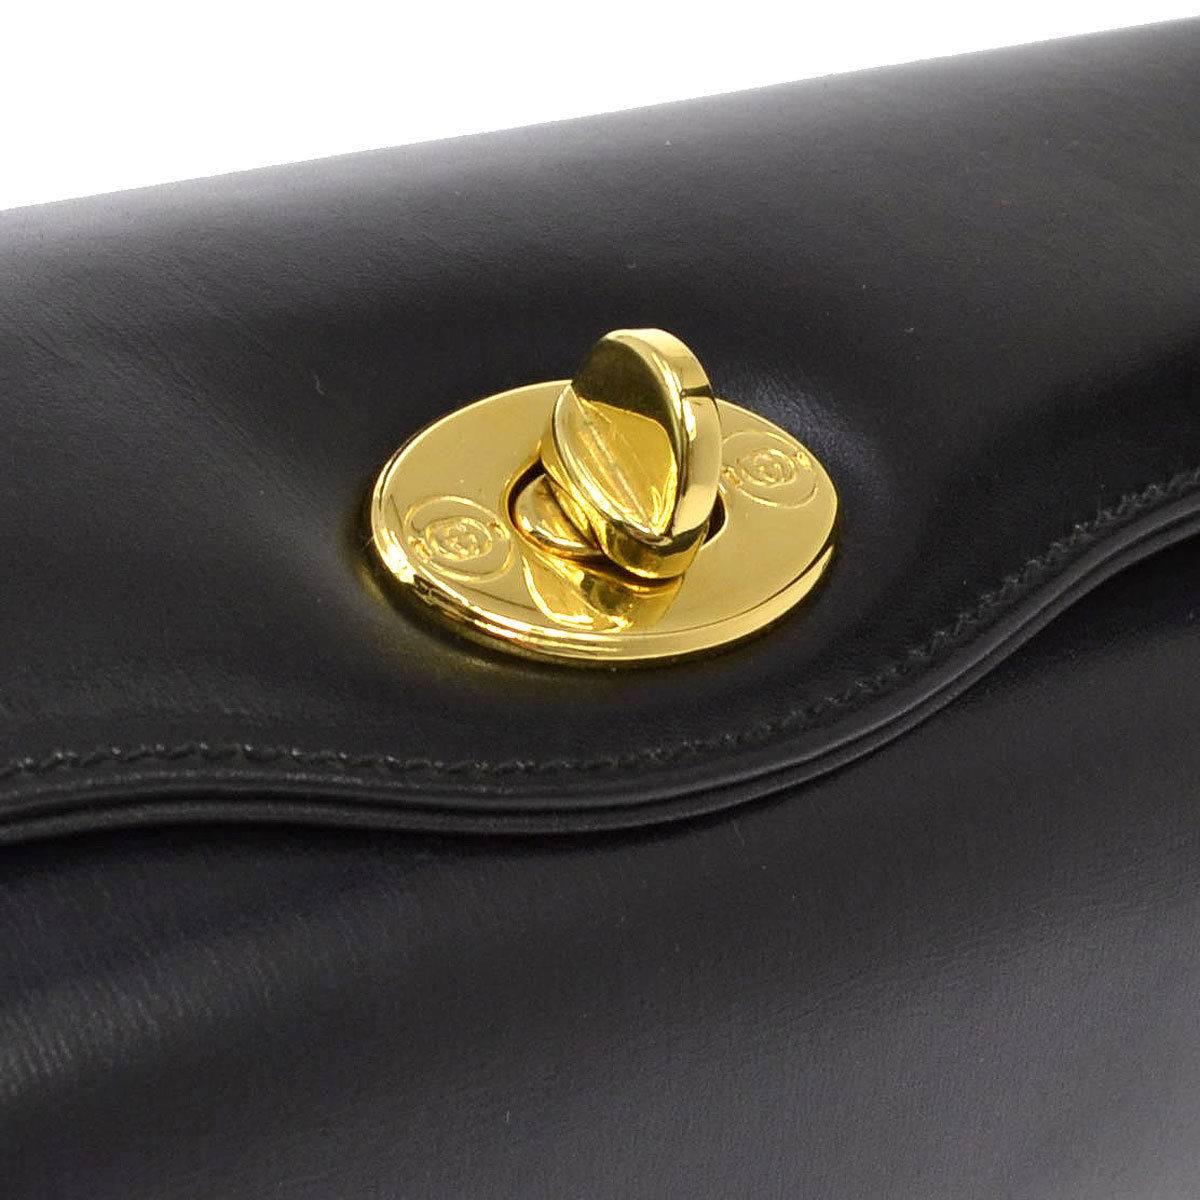 CURATOR'S NOTES

Gucci Black Leather Gold Twist Lock Top Handle Satchel Bag  

Leather
Gold hardware
Twist lock closure
Made in Italy
Handle 6"
Measures 9.5" W x 7" H x 4" D